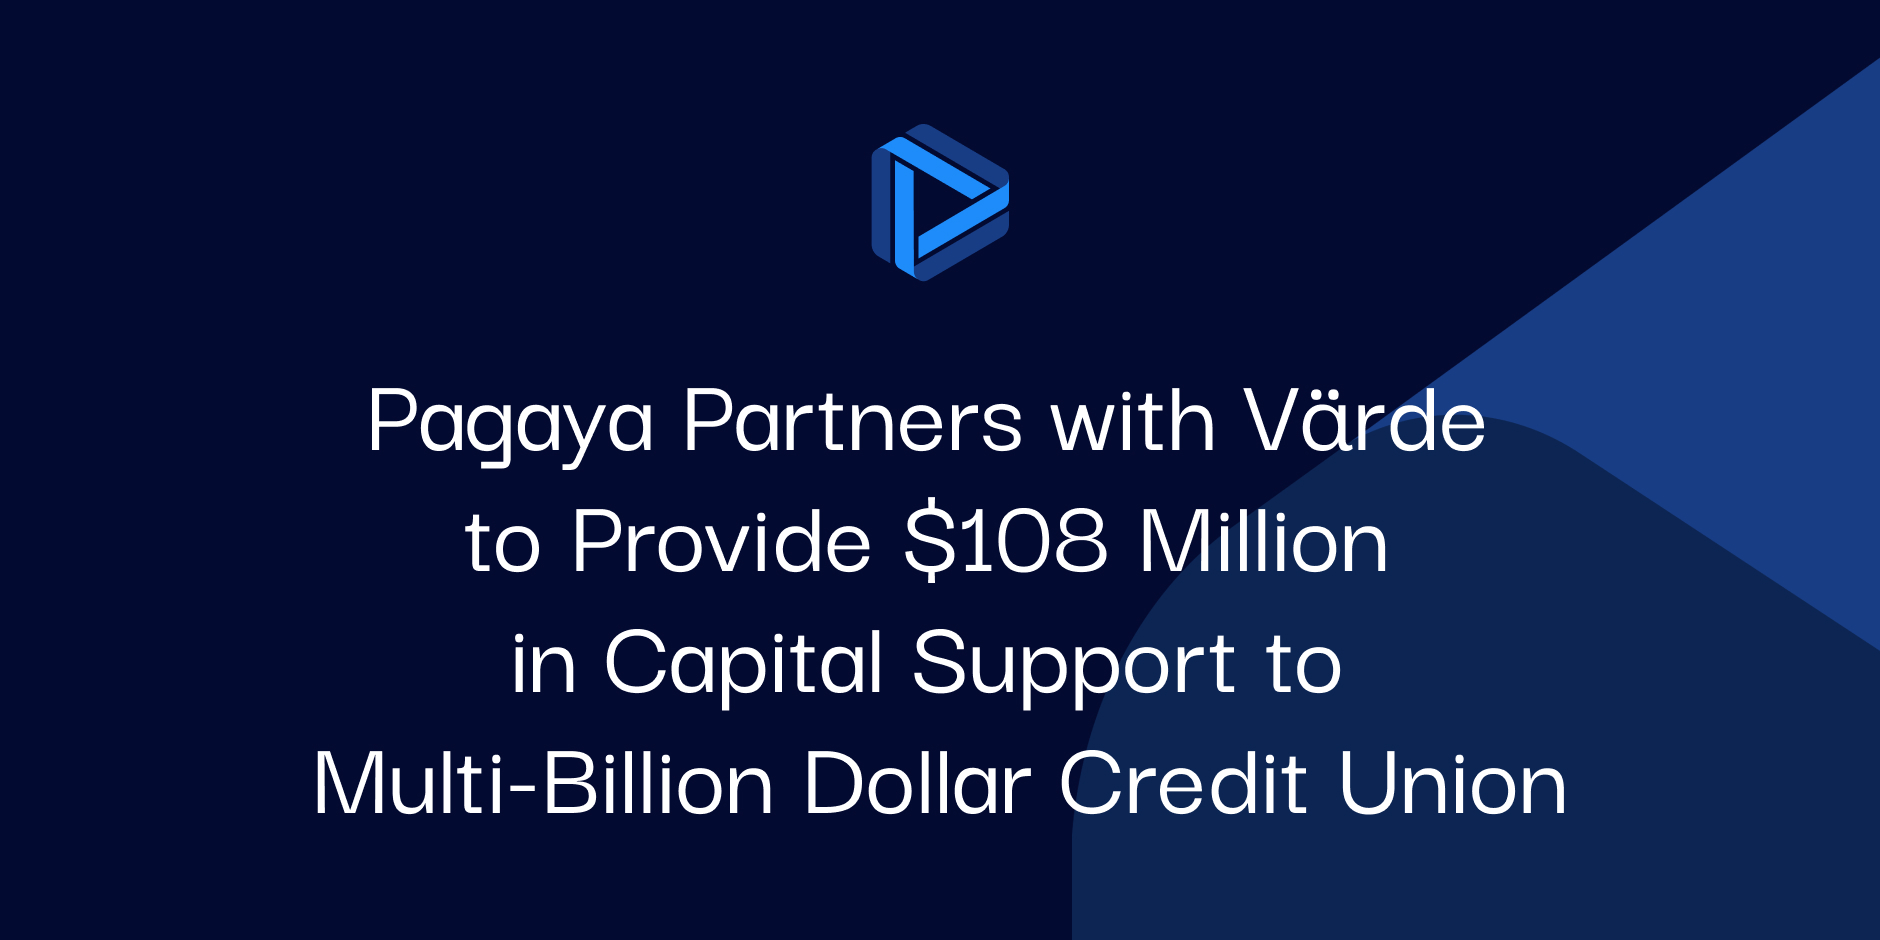 Pagaya Partners with Värde to Provide $108 Million in Capital Support to Multi-Billion Dollar Credit Union